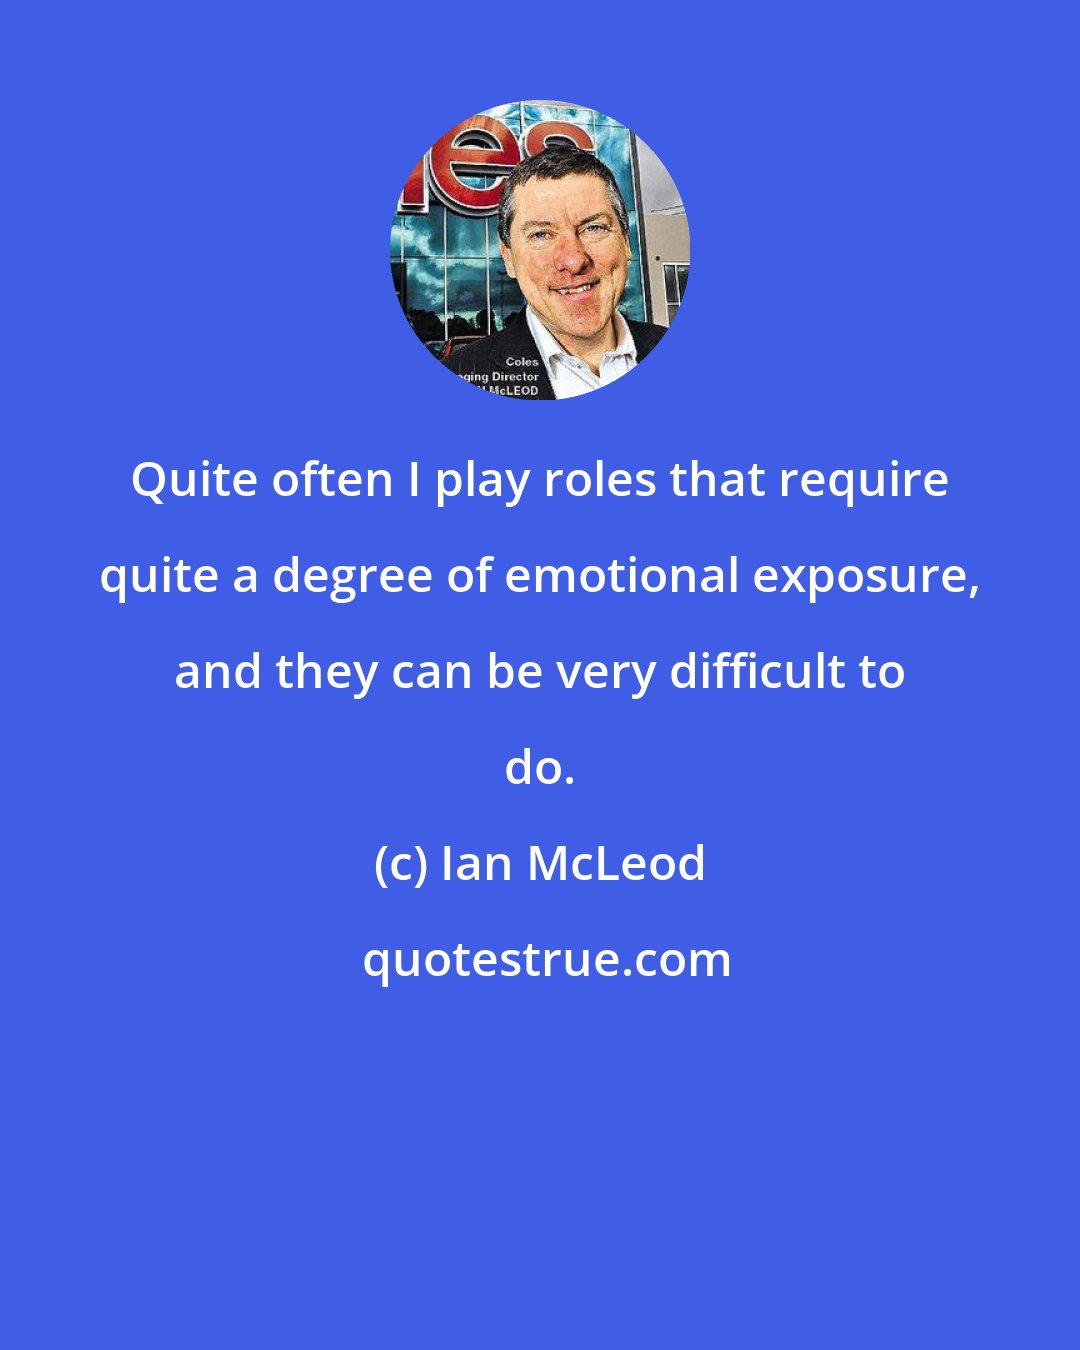 Ian McLeod: Quite often I play roles that require quite a degree of emotional exposure, and they can be very difficult to do.